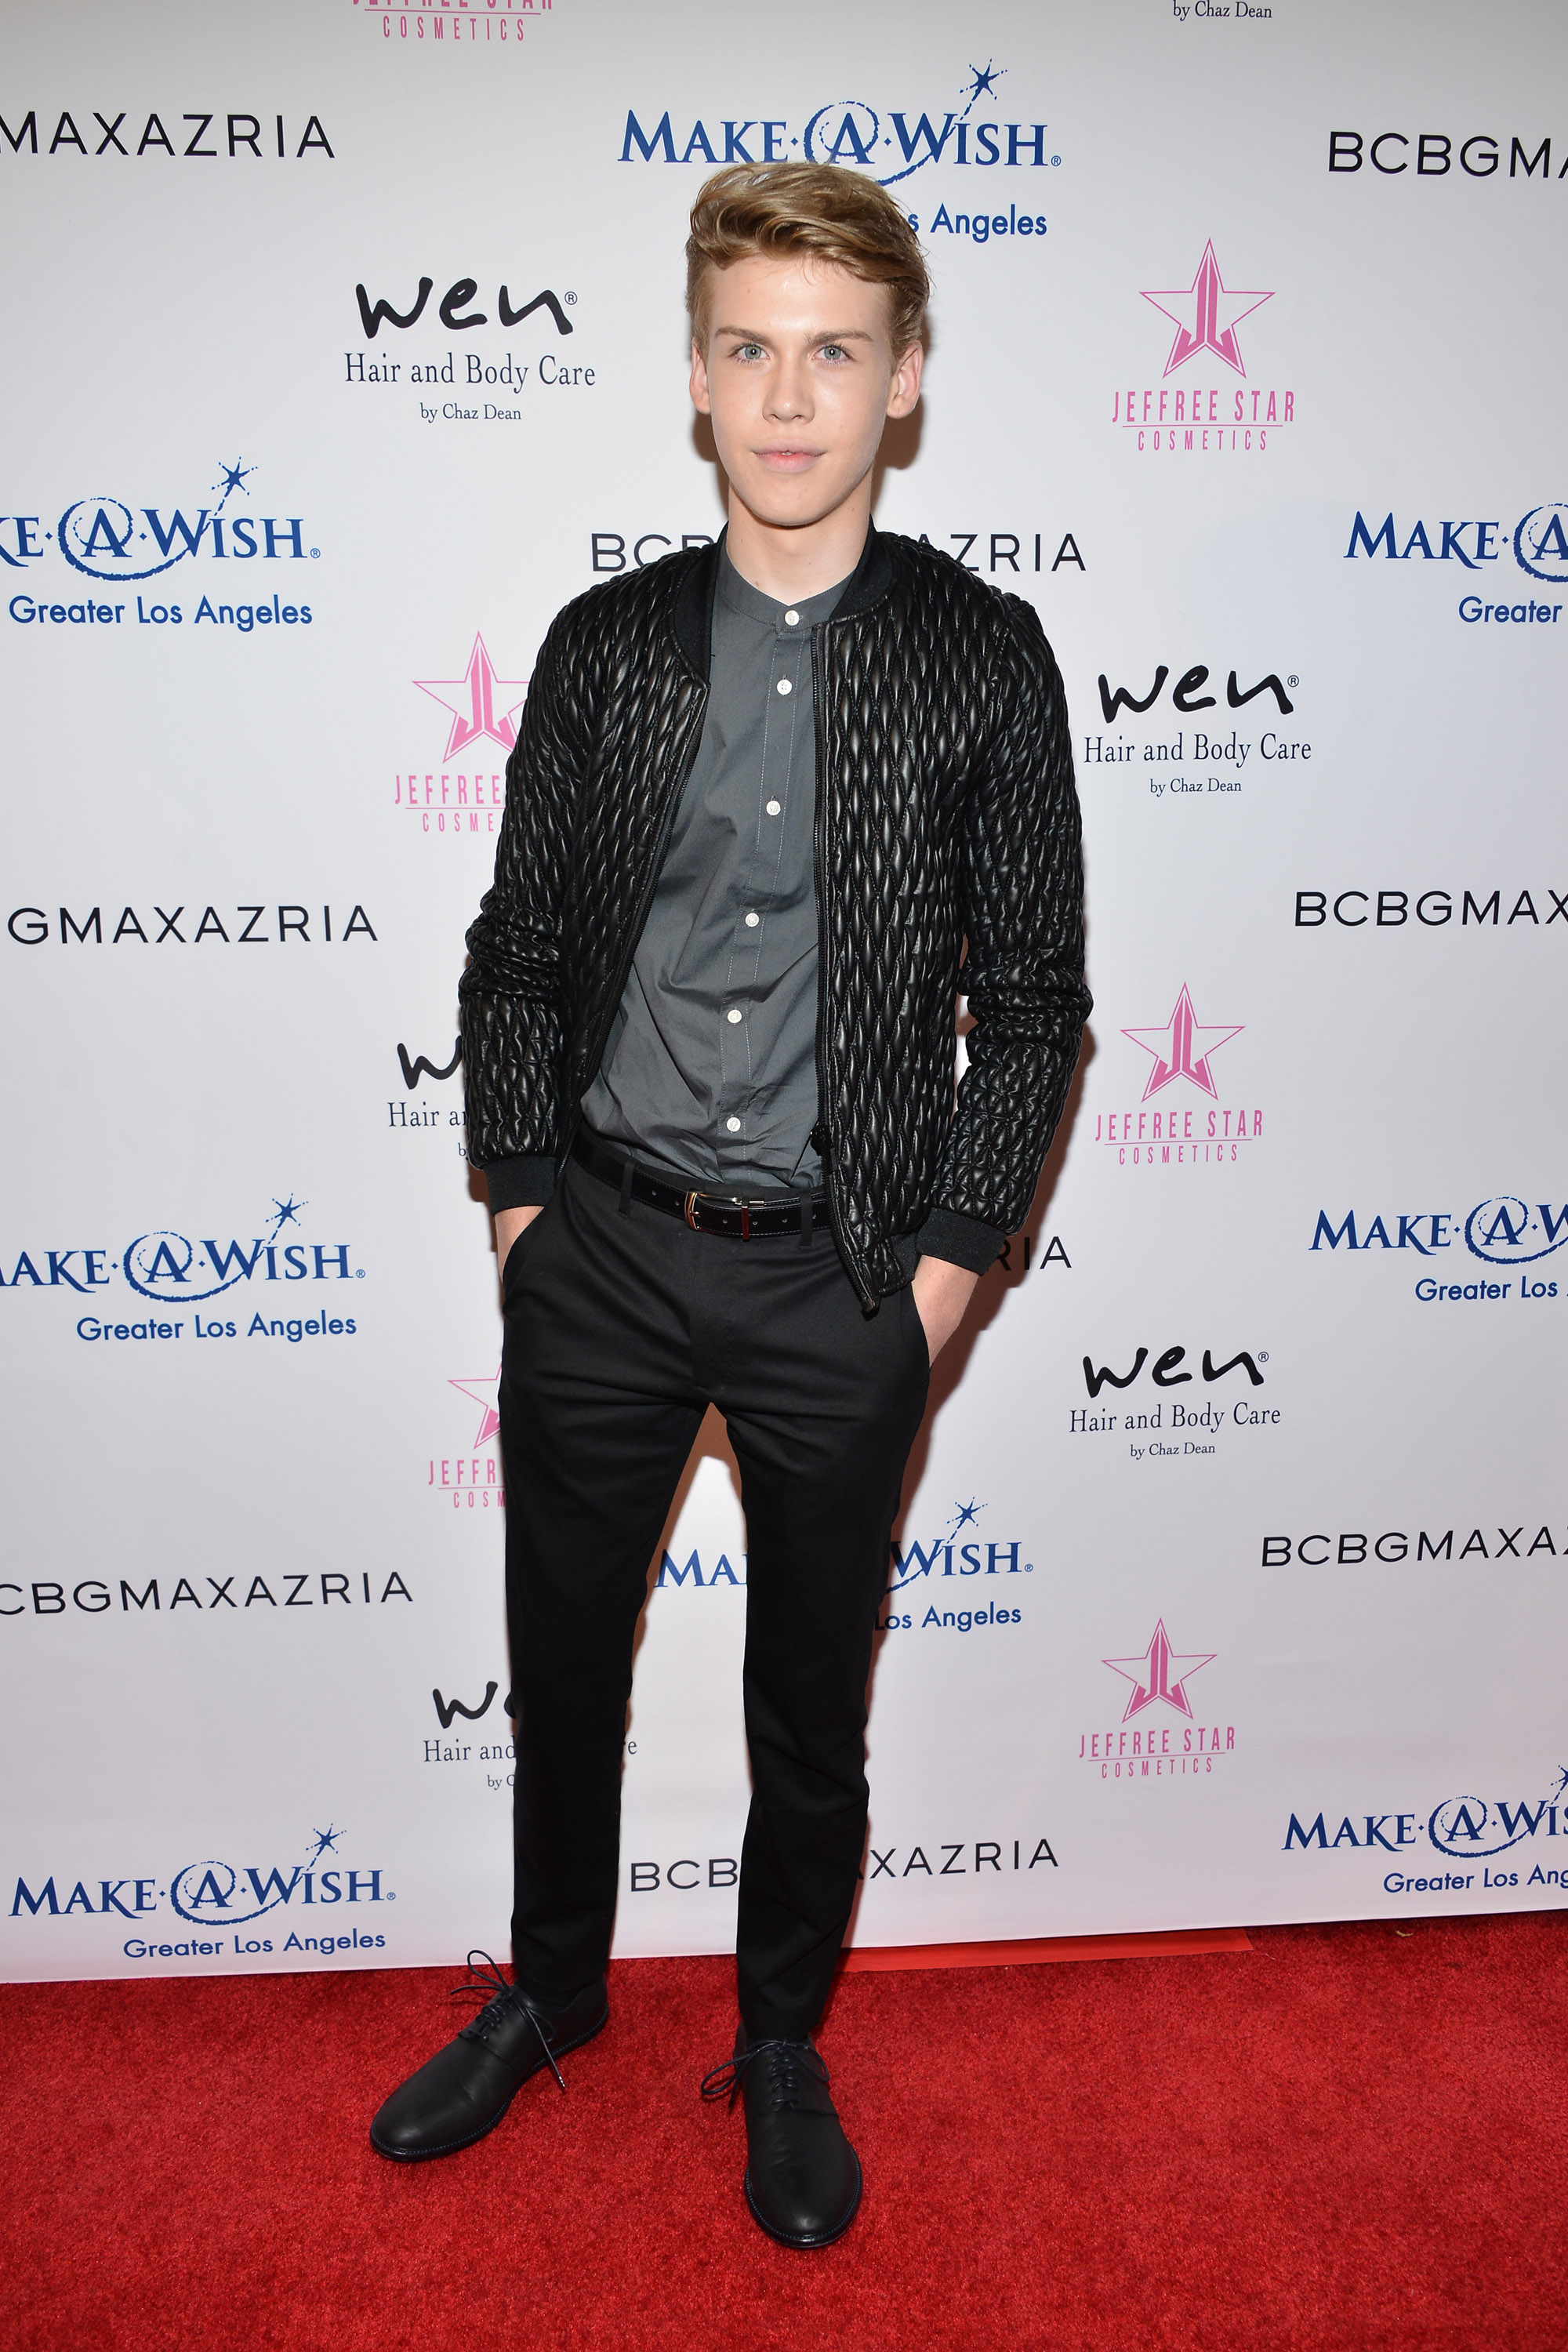 LOS ANGELES, CA - AUGUST 24: Aidan Alexander attends the Inaugural Fashion Show Benefiting Make-A-Wish with BCBGMAXAZRIA and Celebrity Host Brad Goreski at The Taglyan Complex on August 24, 2016 in Los Angeles, California. (Photo by Araya Diaz/WireImage)